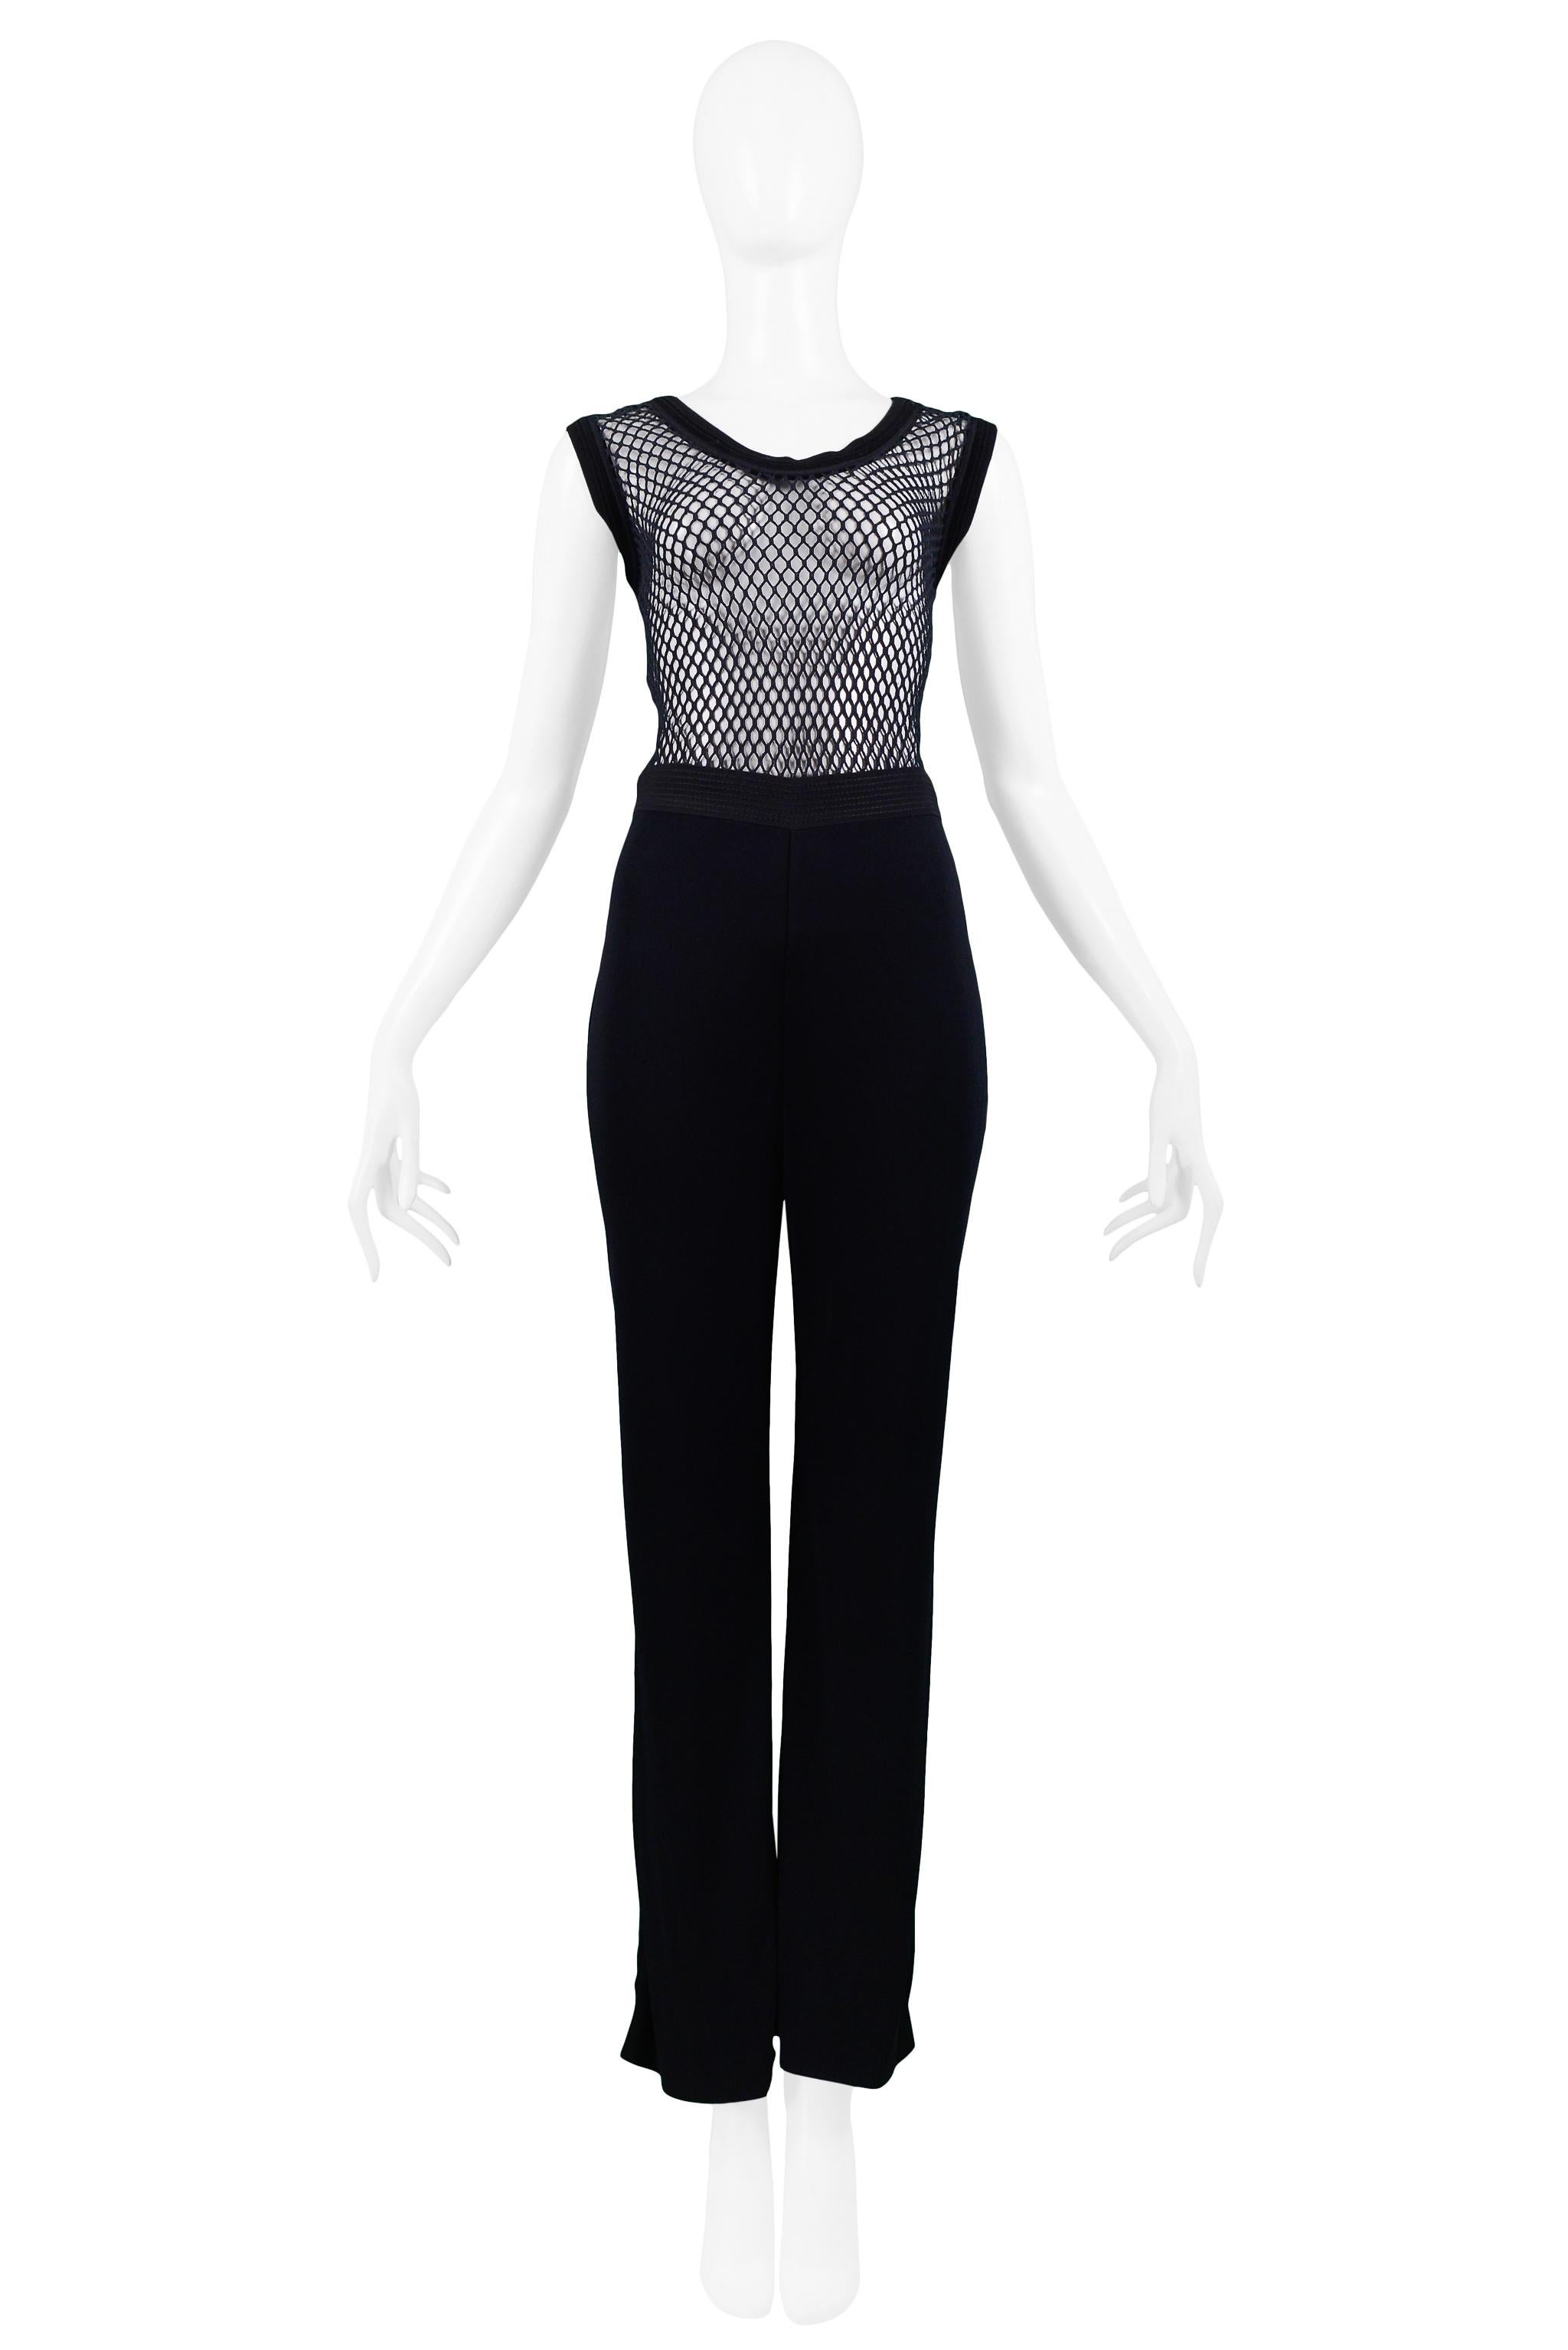 Resurrection Vintage is excited to offer a vintage Gianfranco Ferre black jumpsuit featuring a scoop-neck sleeveless mesh bodice with ribbed knit trim and high-waisted pants with a slight bootcut.

Gianfranco Ferre 
Size 40
Mesh & Jersey
Excellent